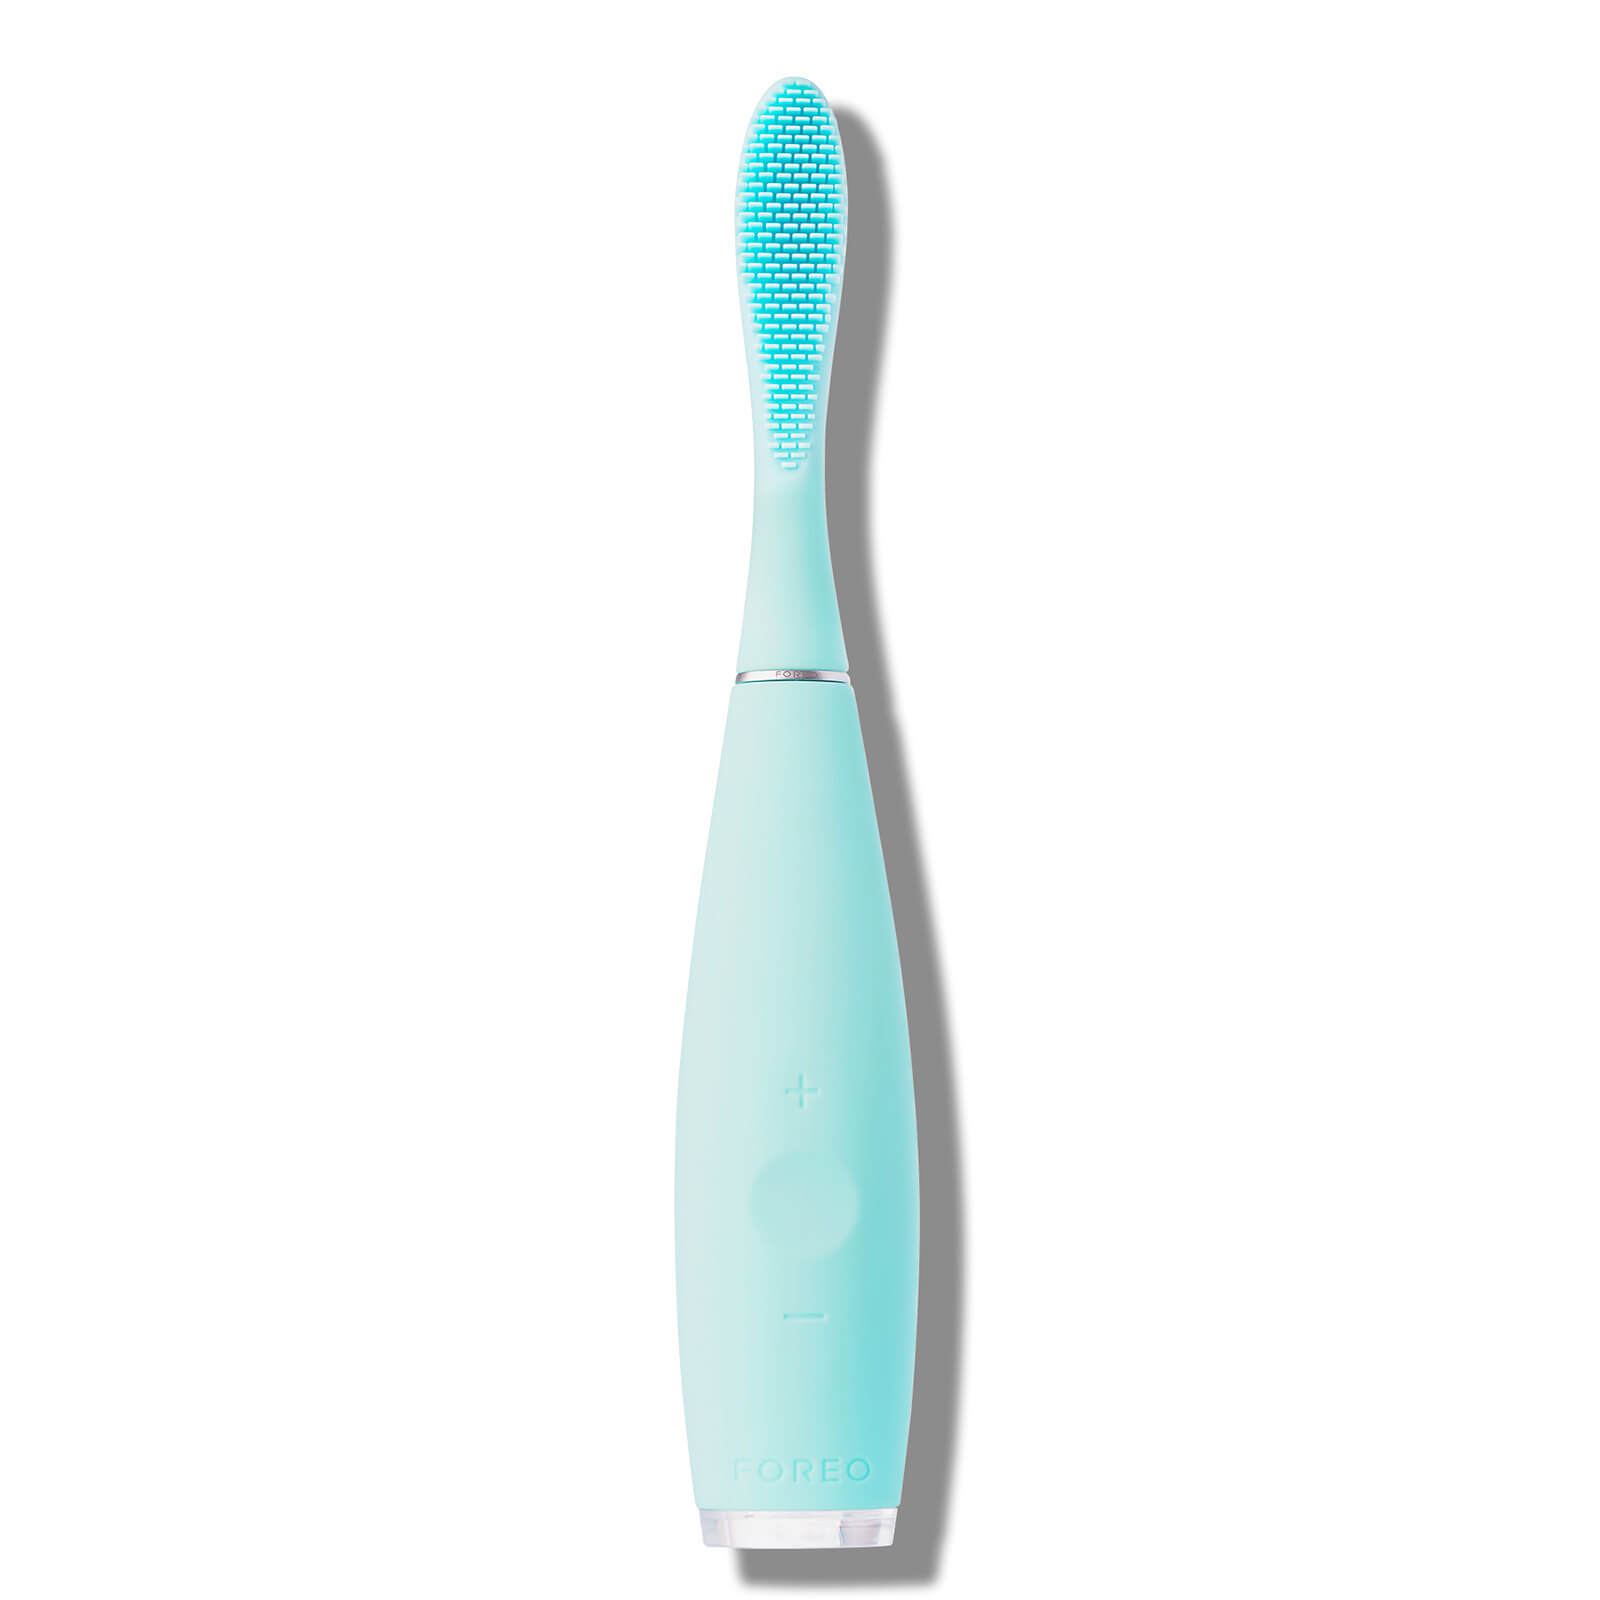 FOREO ISSA 2 Sensitive Electric Sonic Toothbrush Set (Various Shades) - Mint